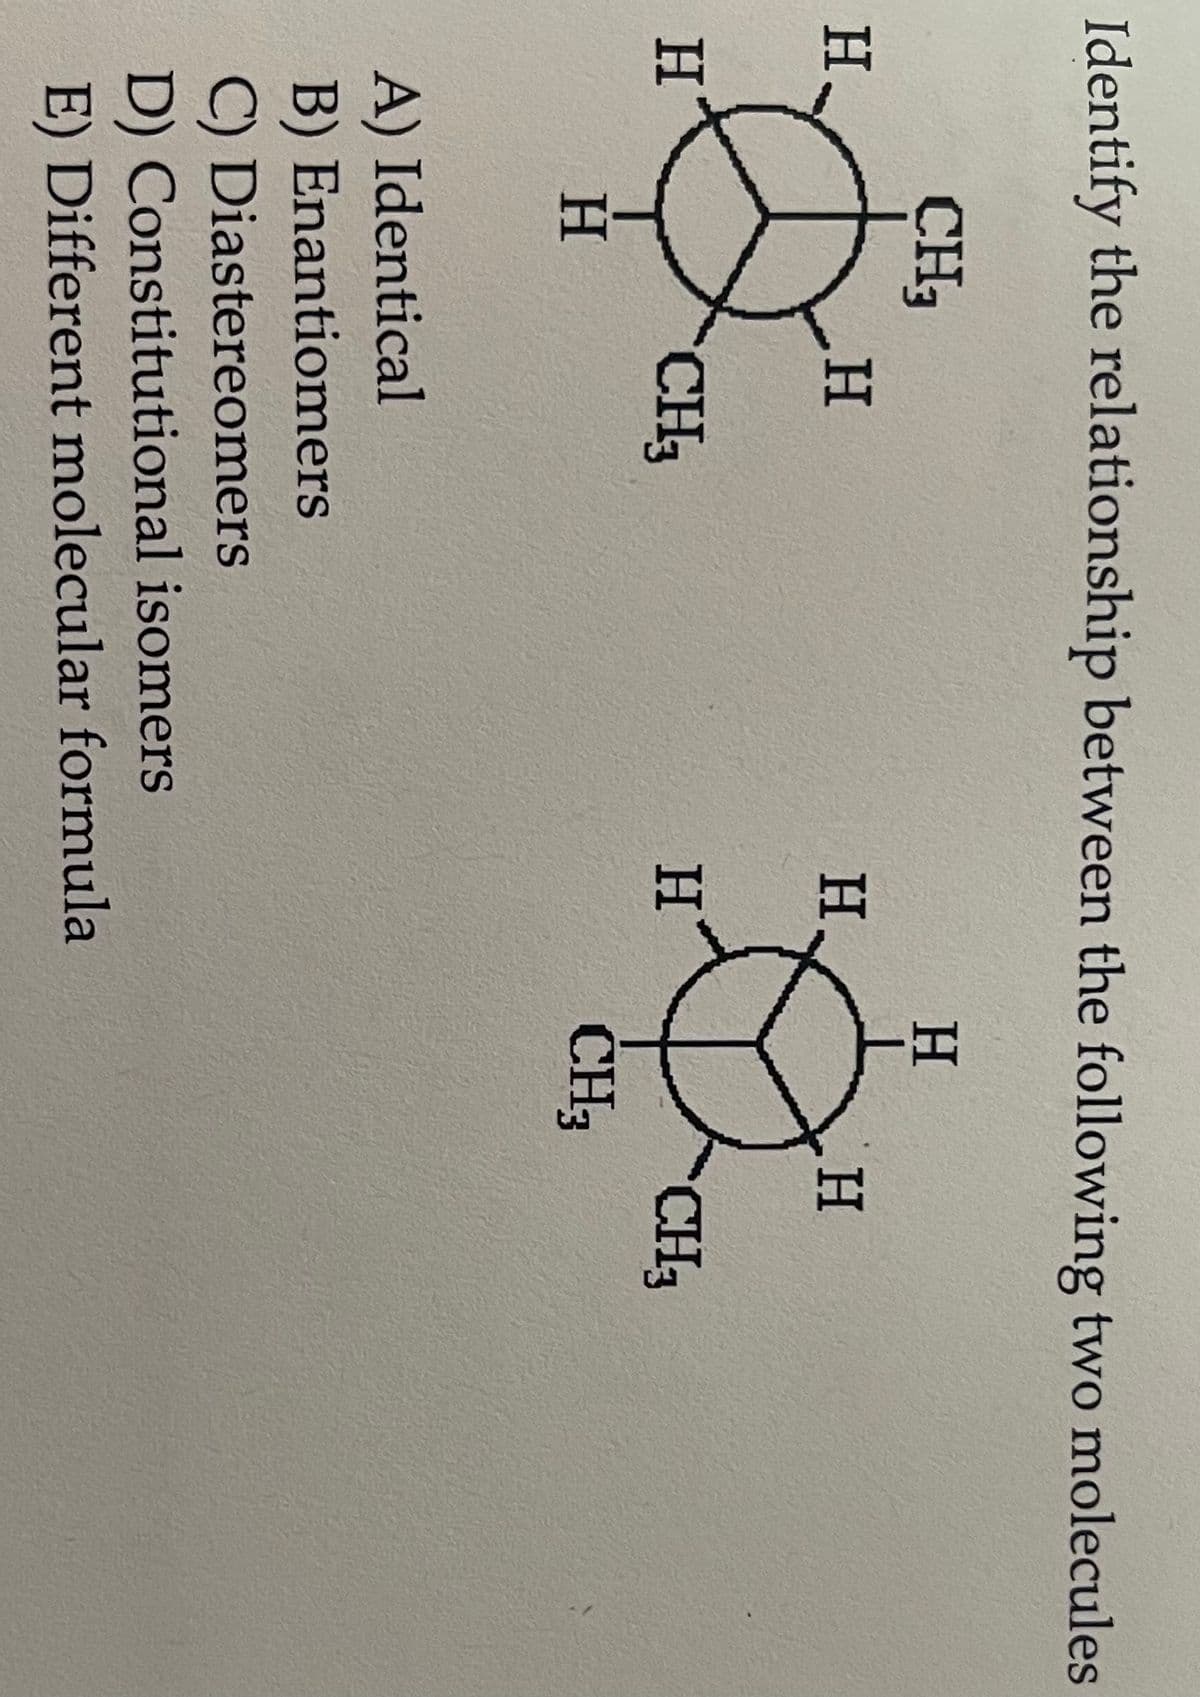 Identify the relationship between the following two molecules
CH3
H₂
H
H
H
CH3
H
H
A) Identical
B) Enantiomers
C) Diastereomers
D) Constitutional isomers
E) Different molecular formula
H
CH₂
H
CH3